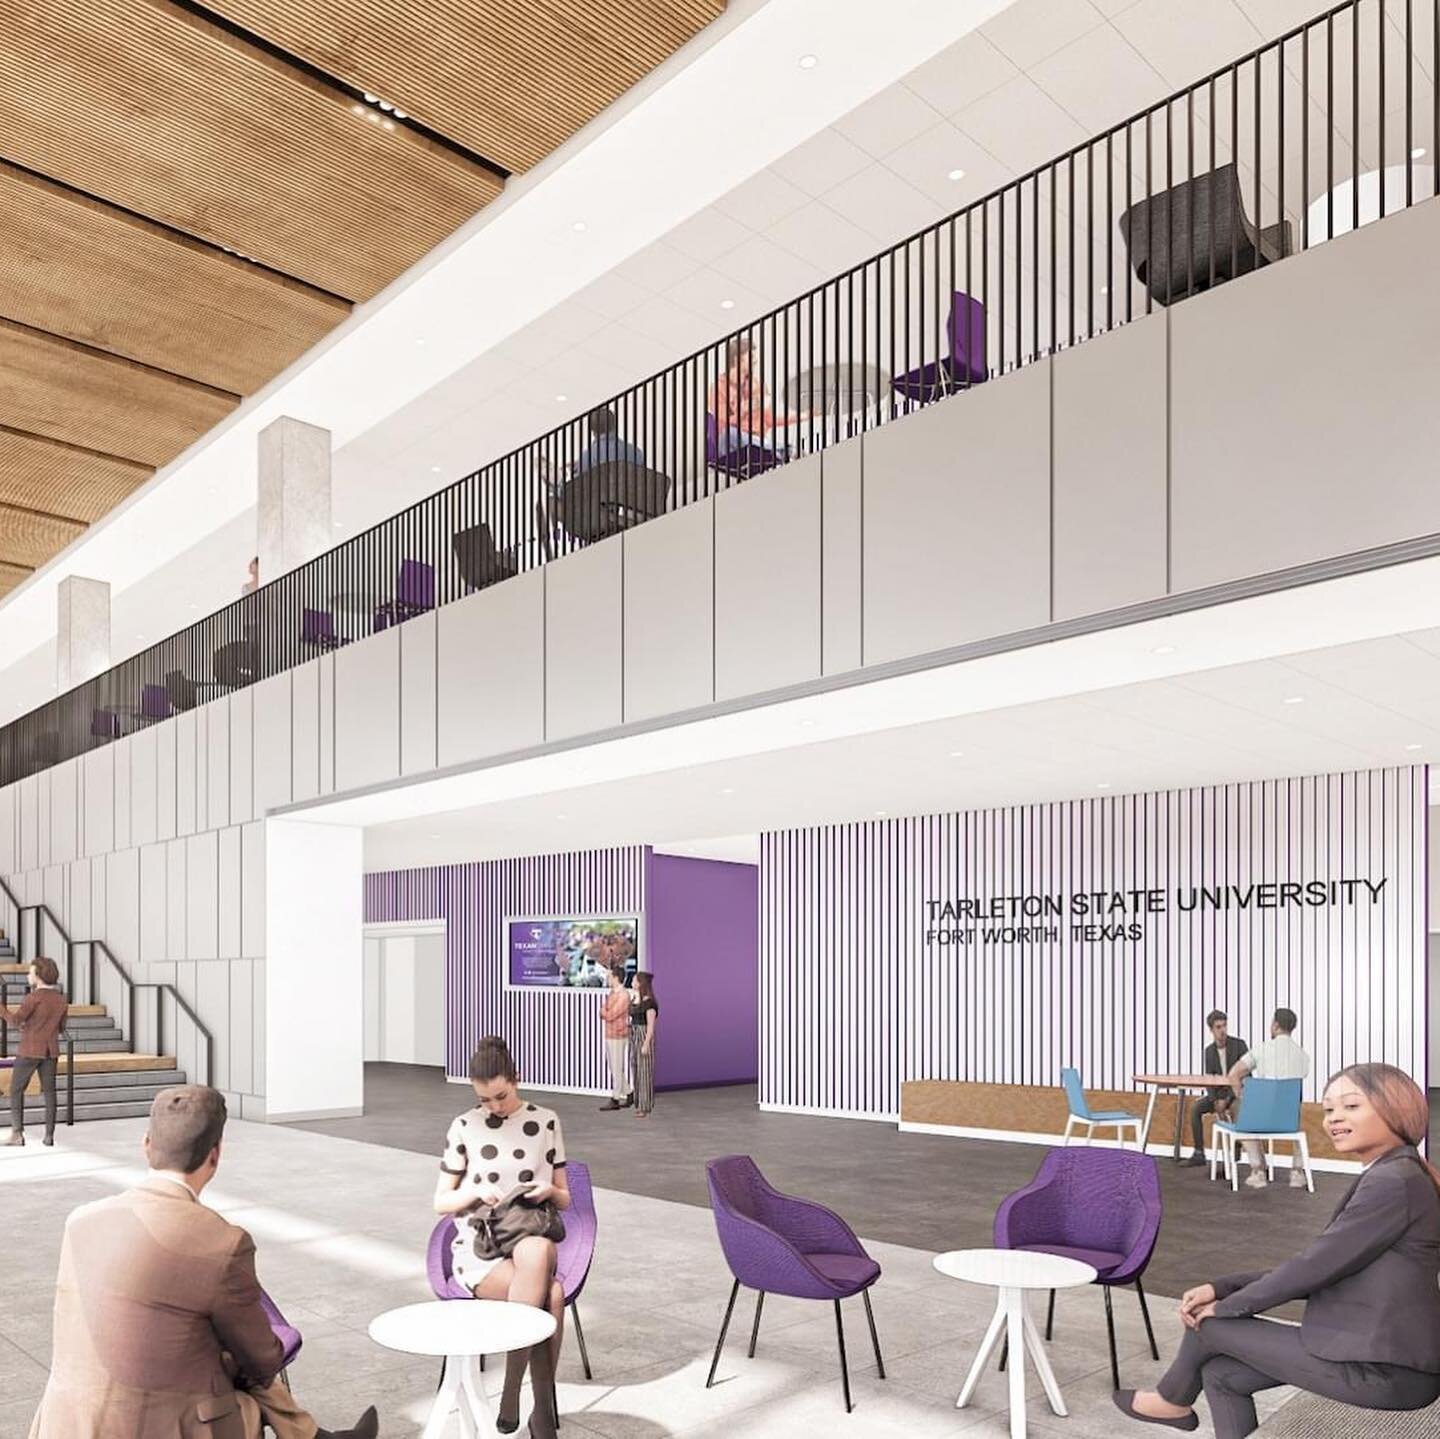 One of our @t3partnership institutions, @tarletonstate, recently broke ground on its Interprofessional Education (IPE) Building, the second building on their Fort Worth campus! The new space will &ldquo;address the region's two most pressing needs, i